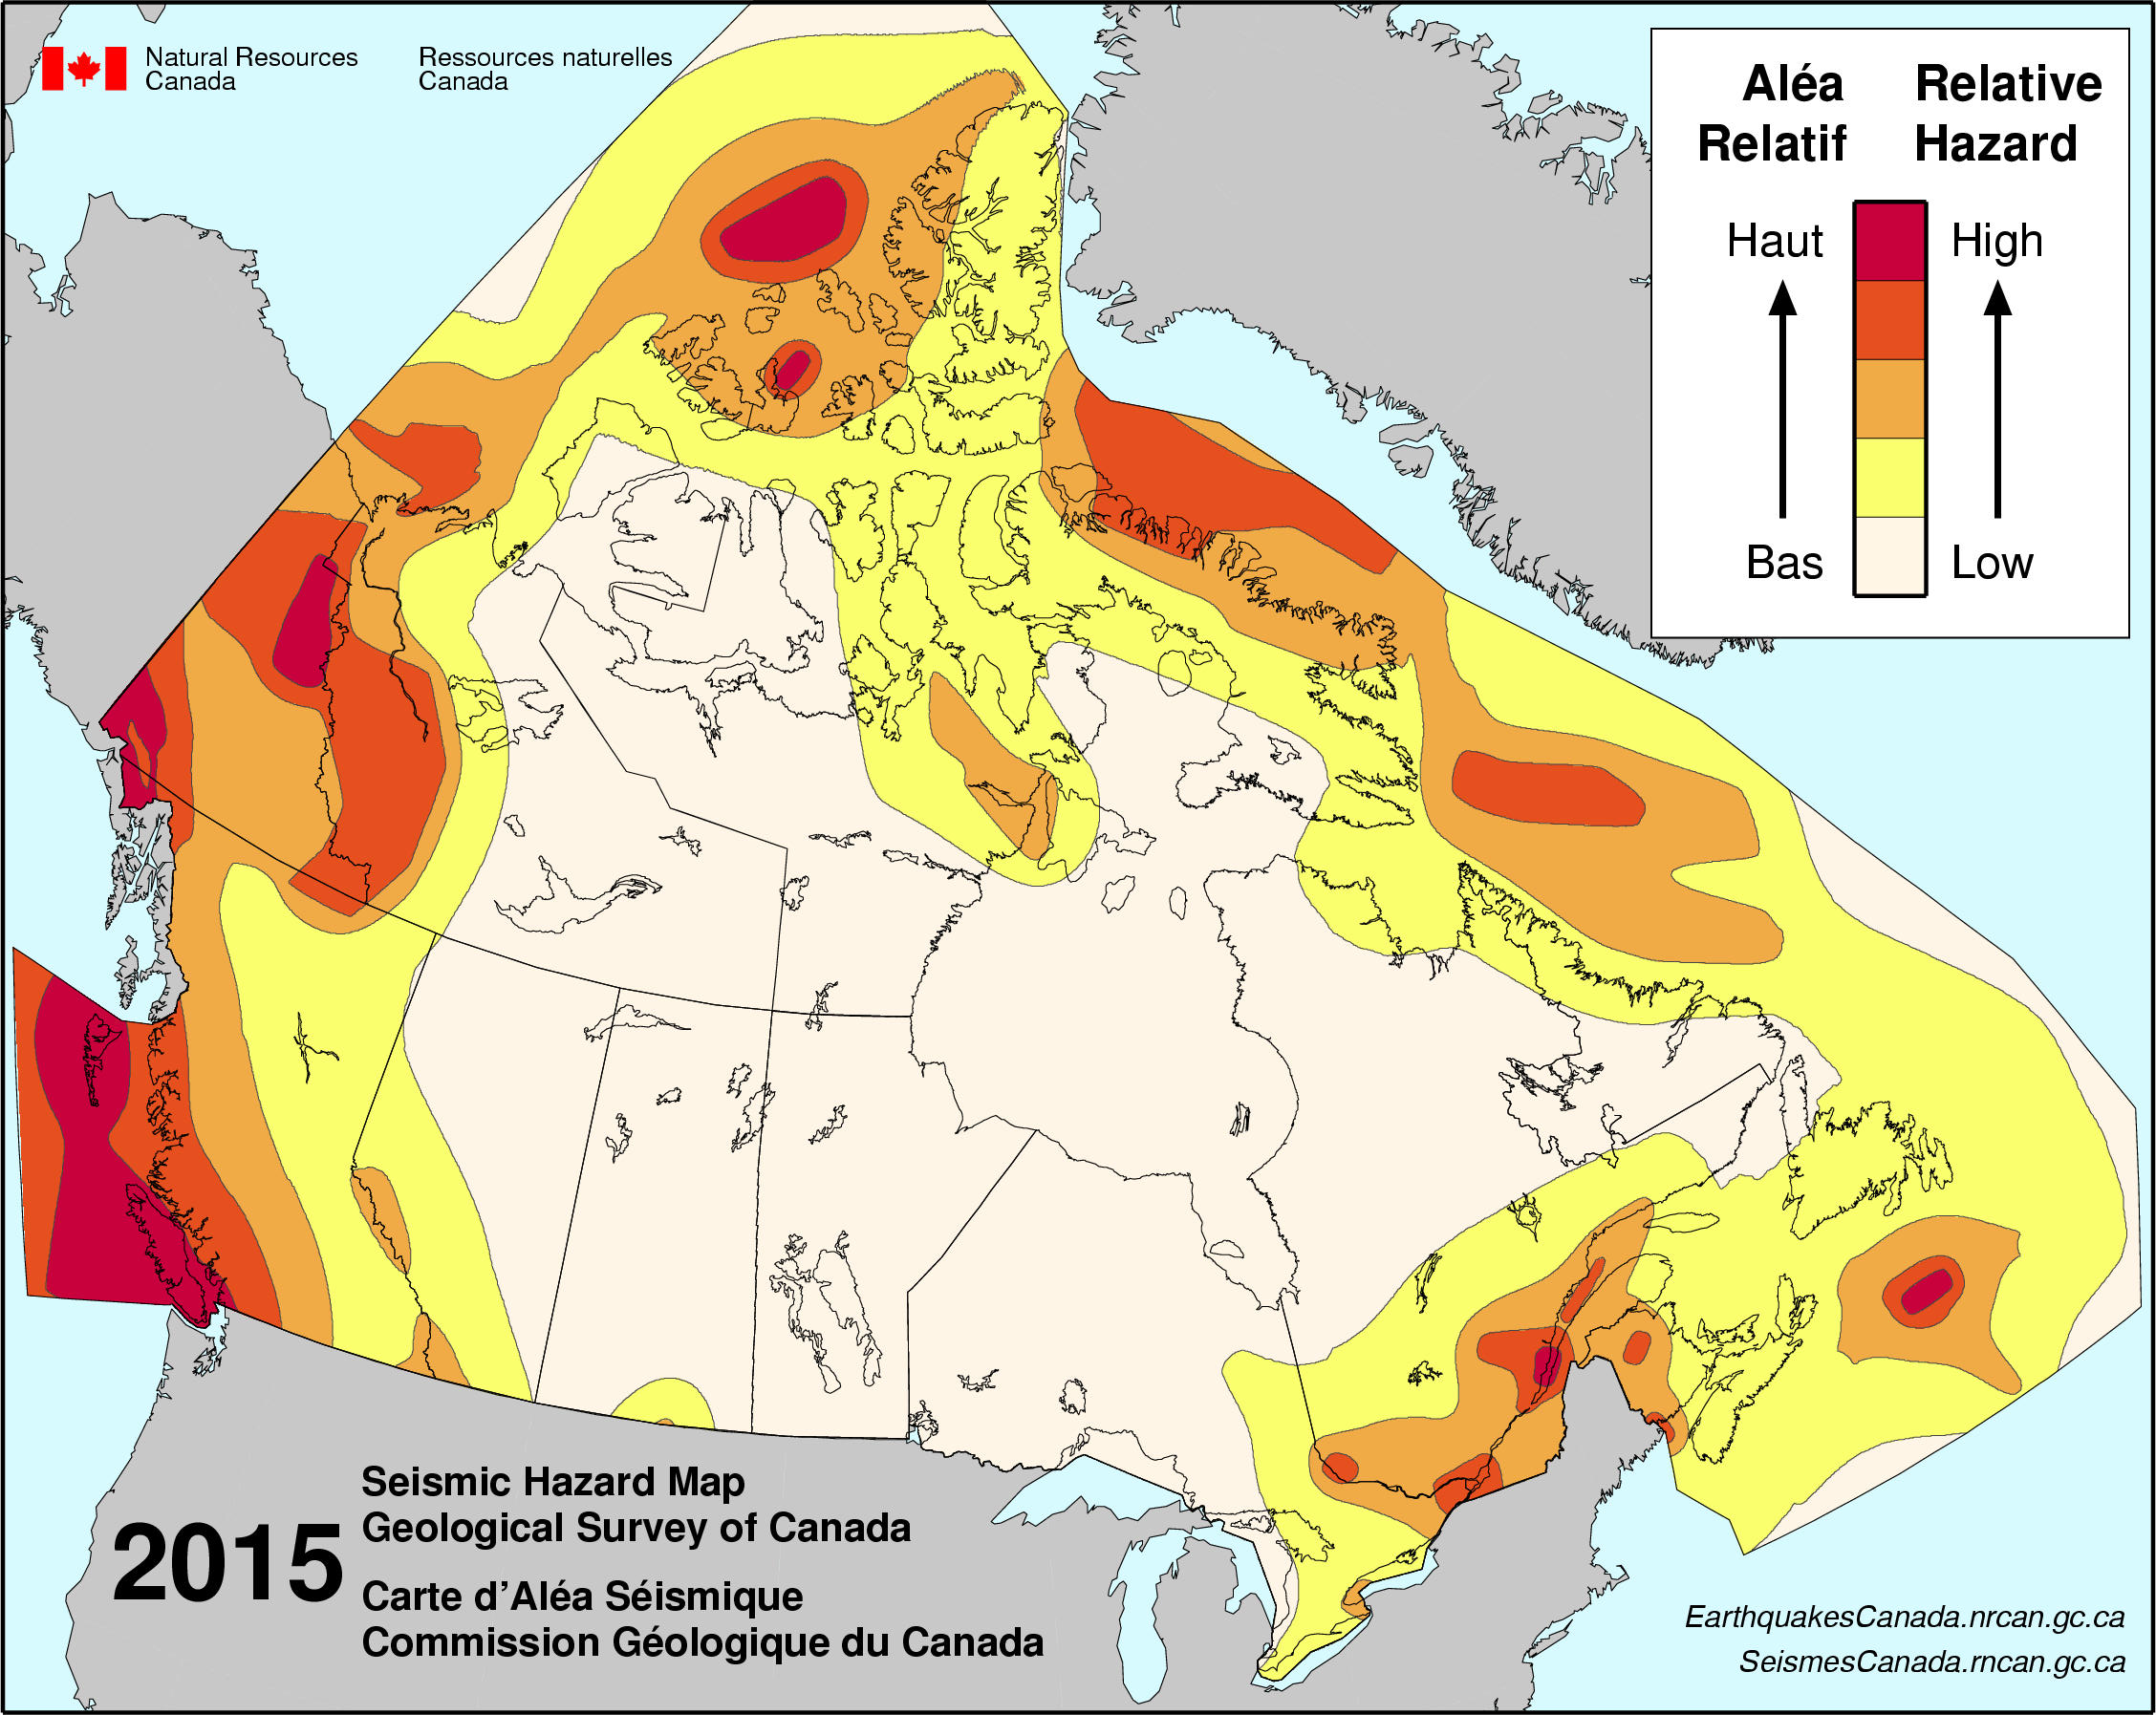 Simplified seismic hazard map for Canada, the provinces and territories